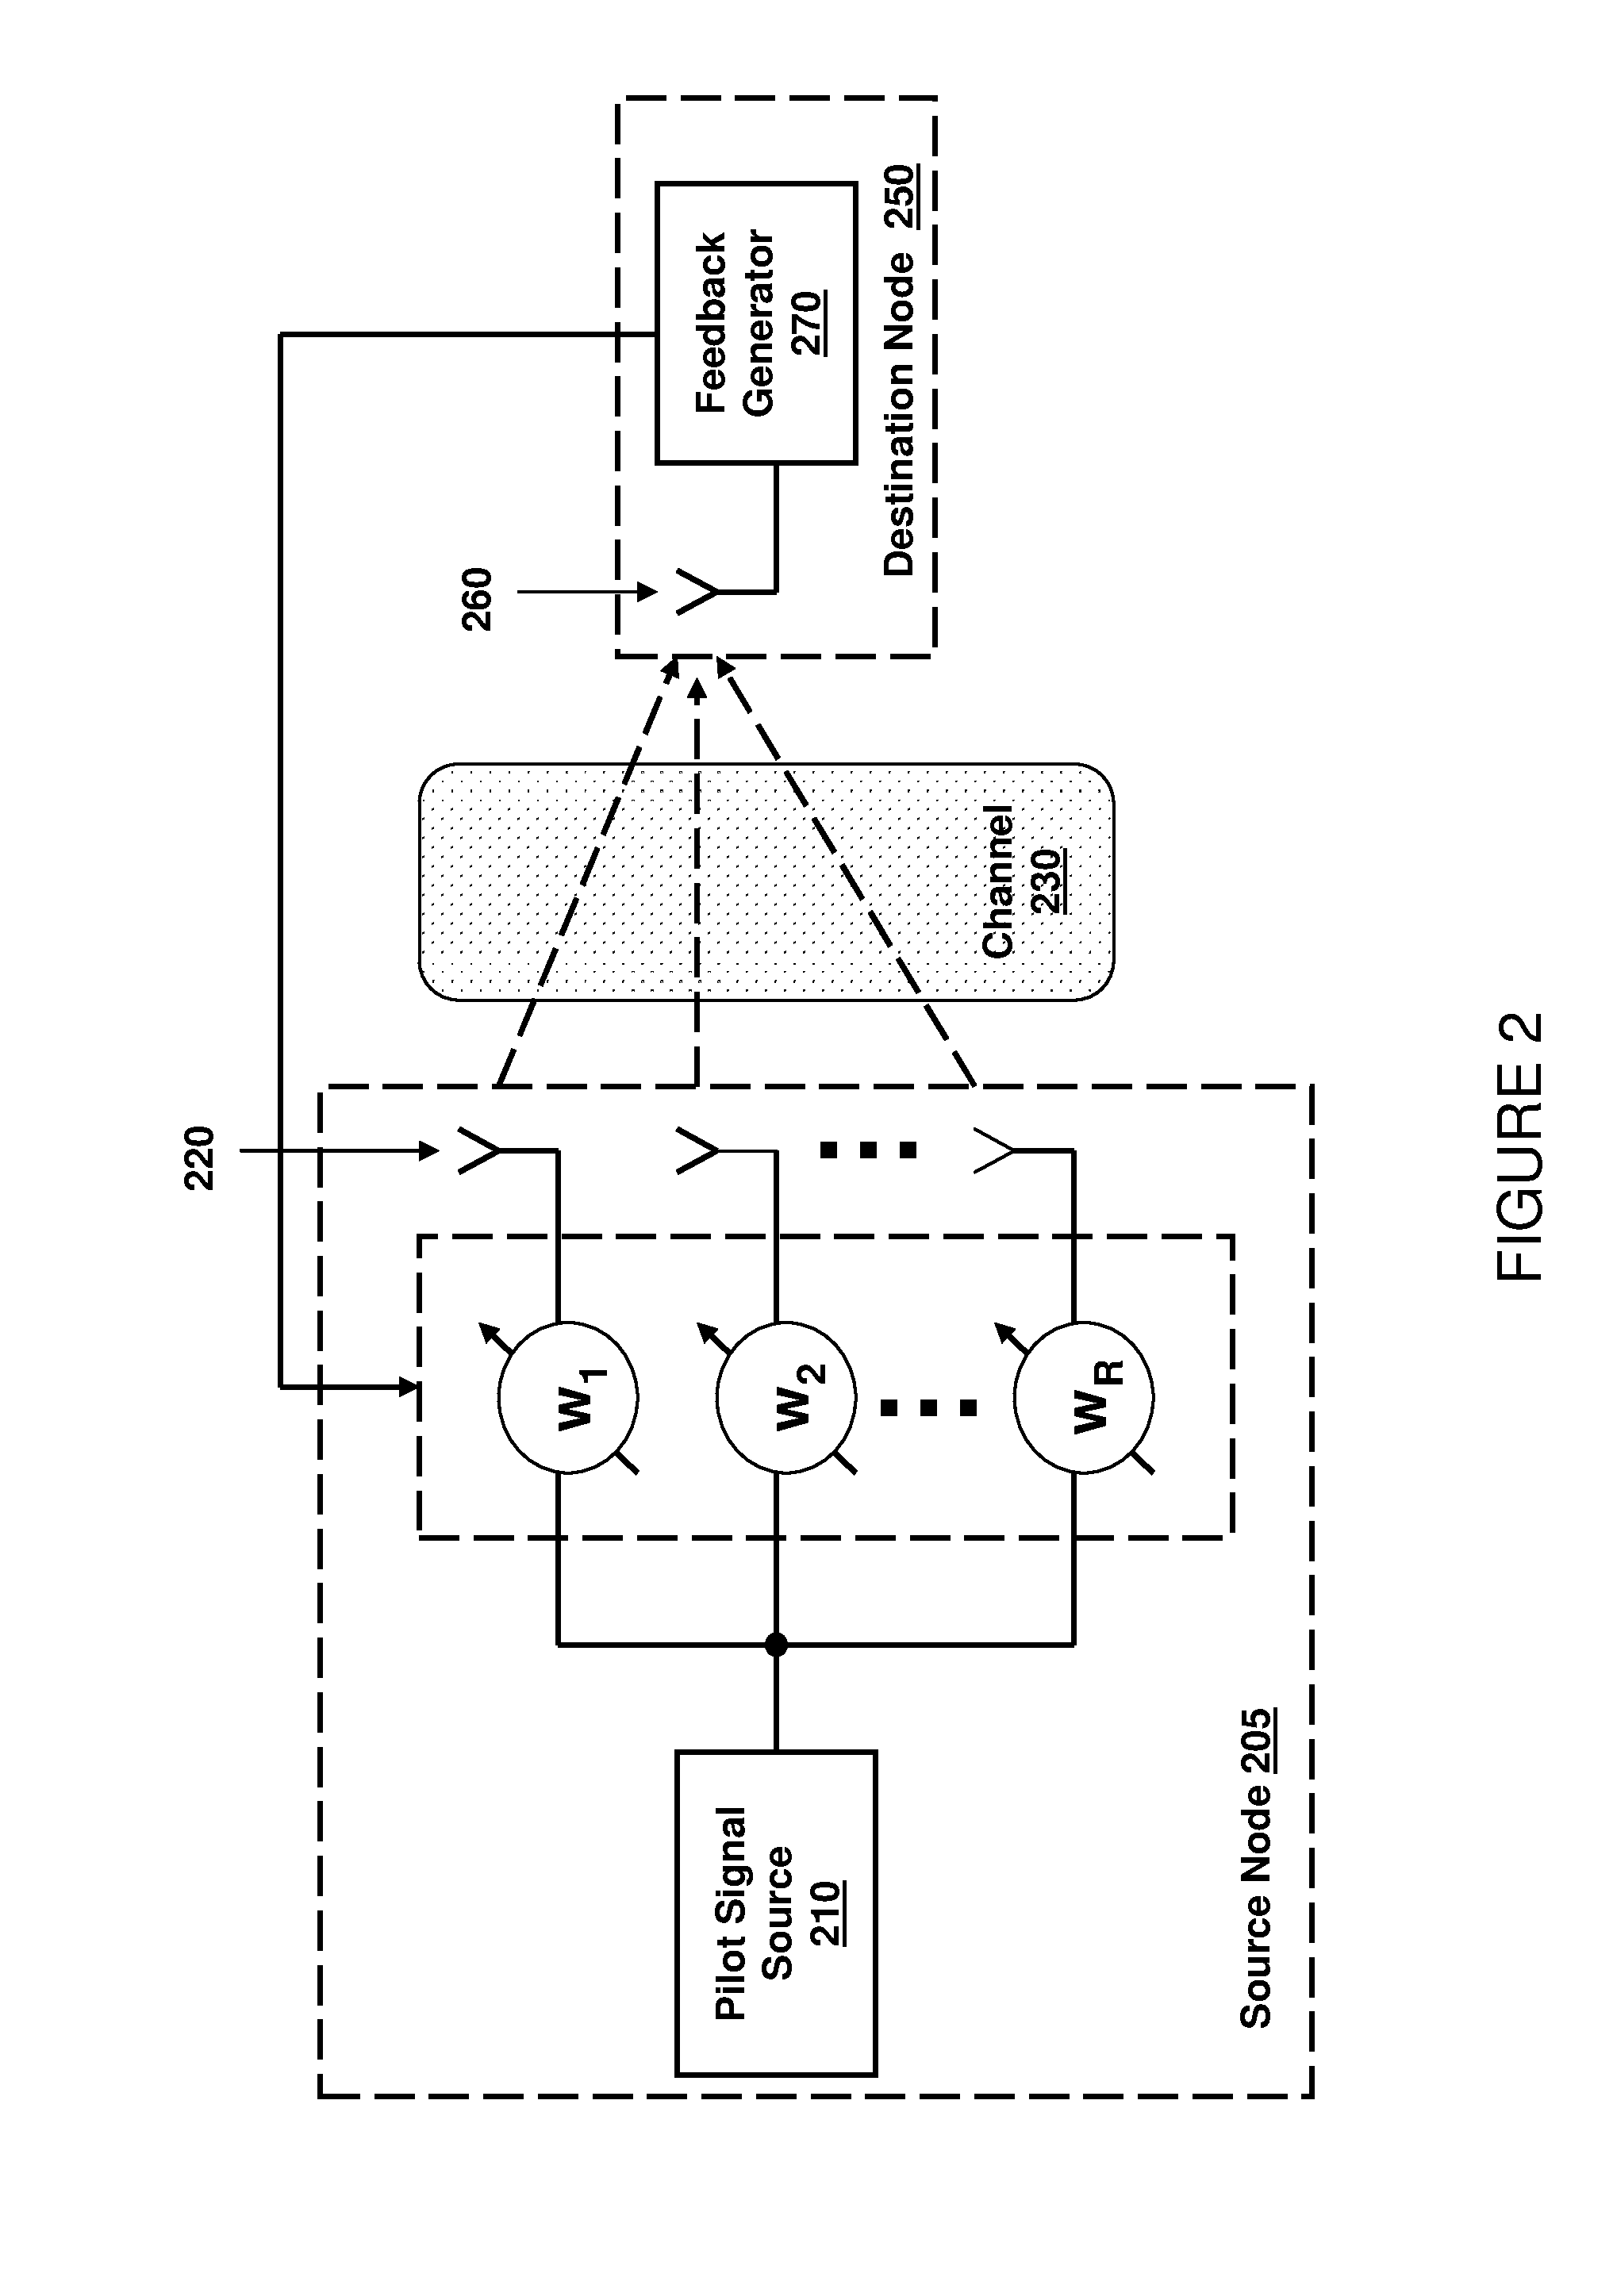 System for distributed beamforming for a communication system employing relay nodes